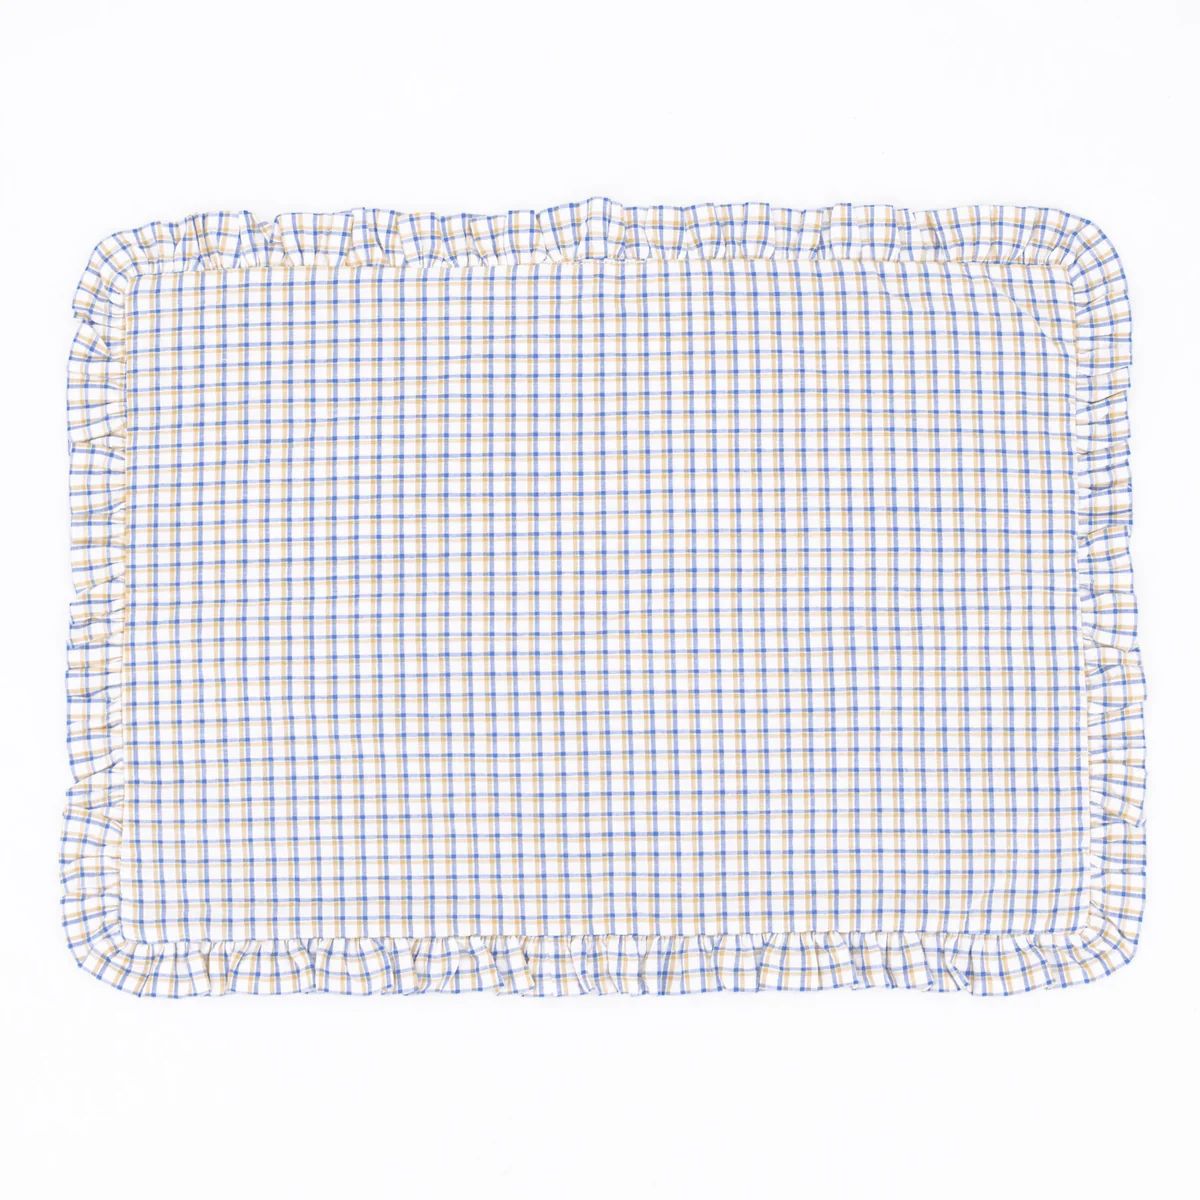 Love Placemat - Gingham | Dondolo